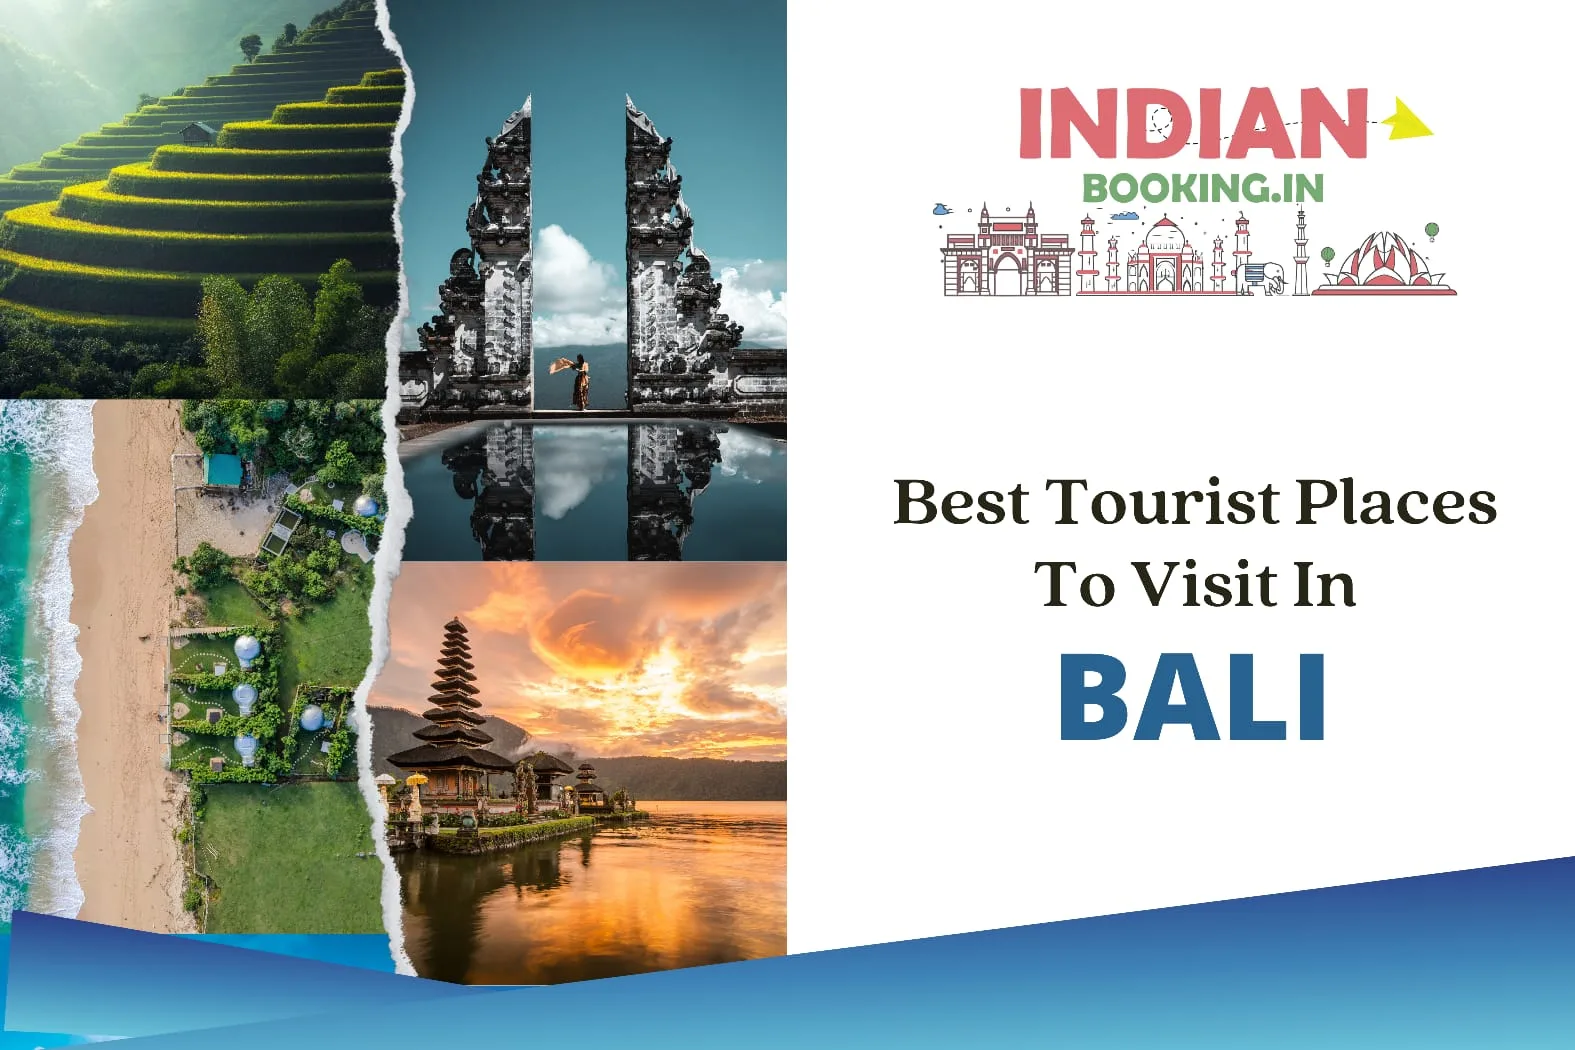 Best Tourist places to visit in bali